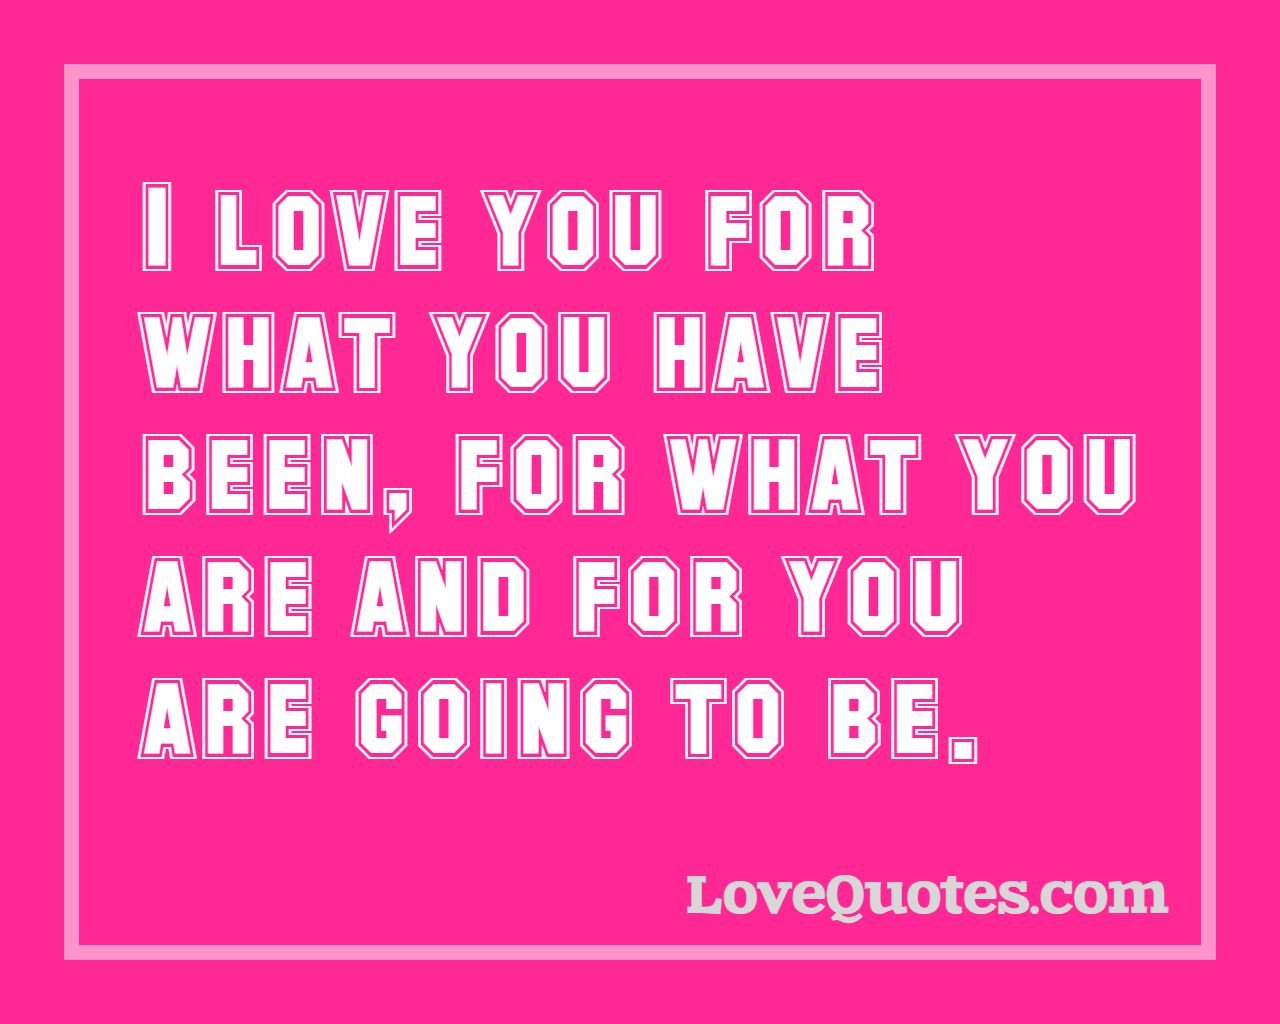 What You Have - Love Quotes